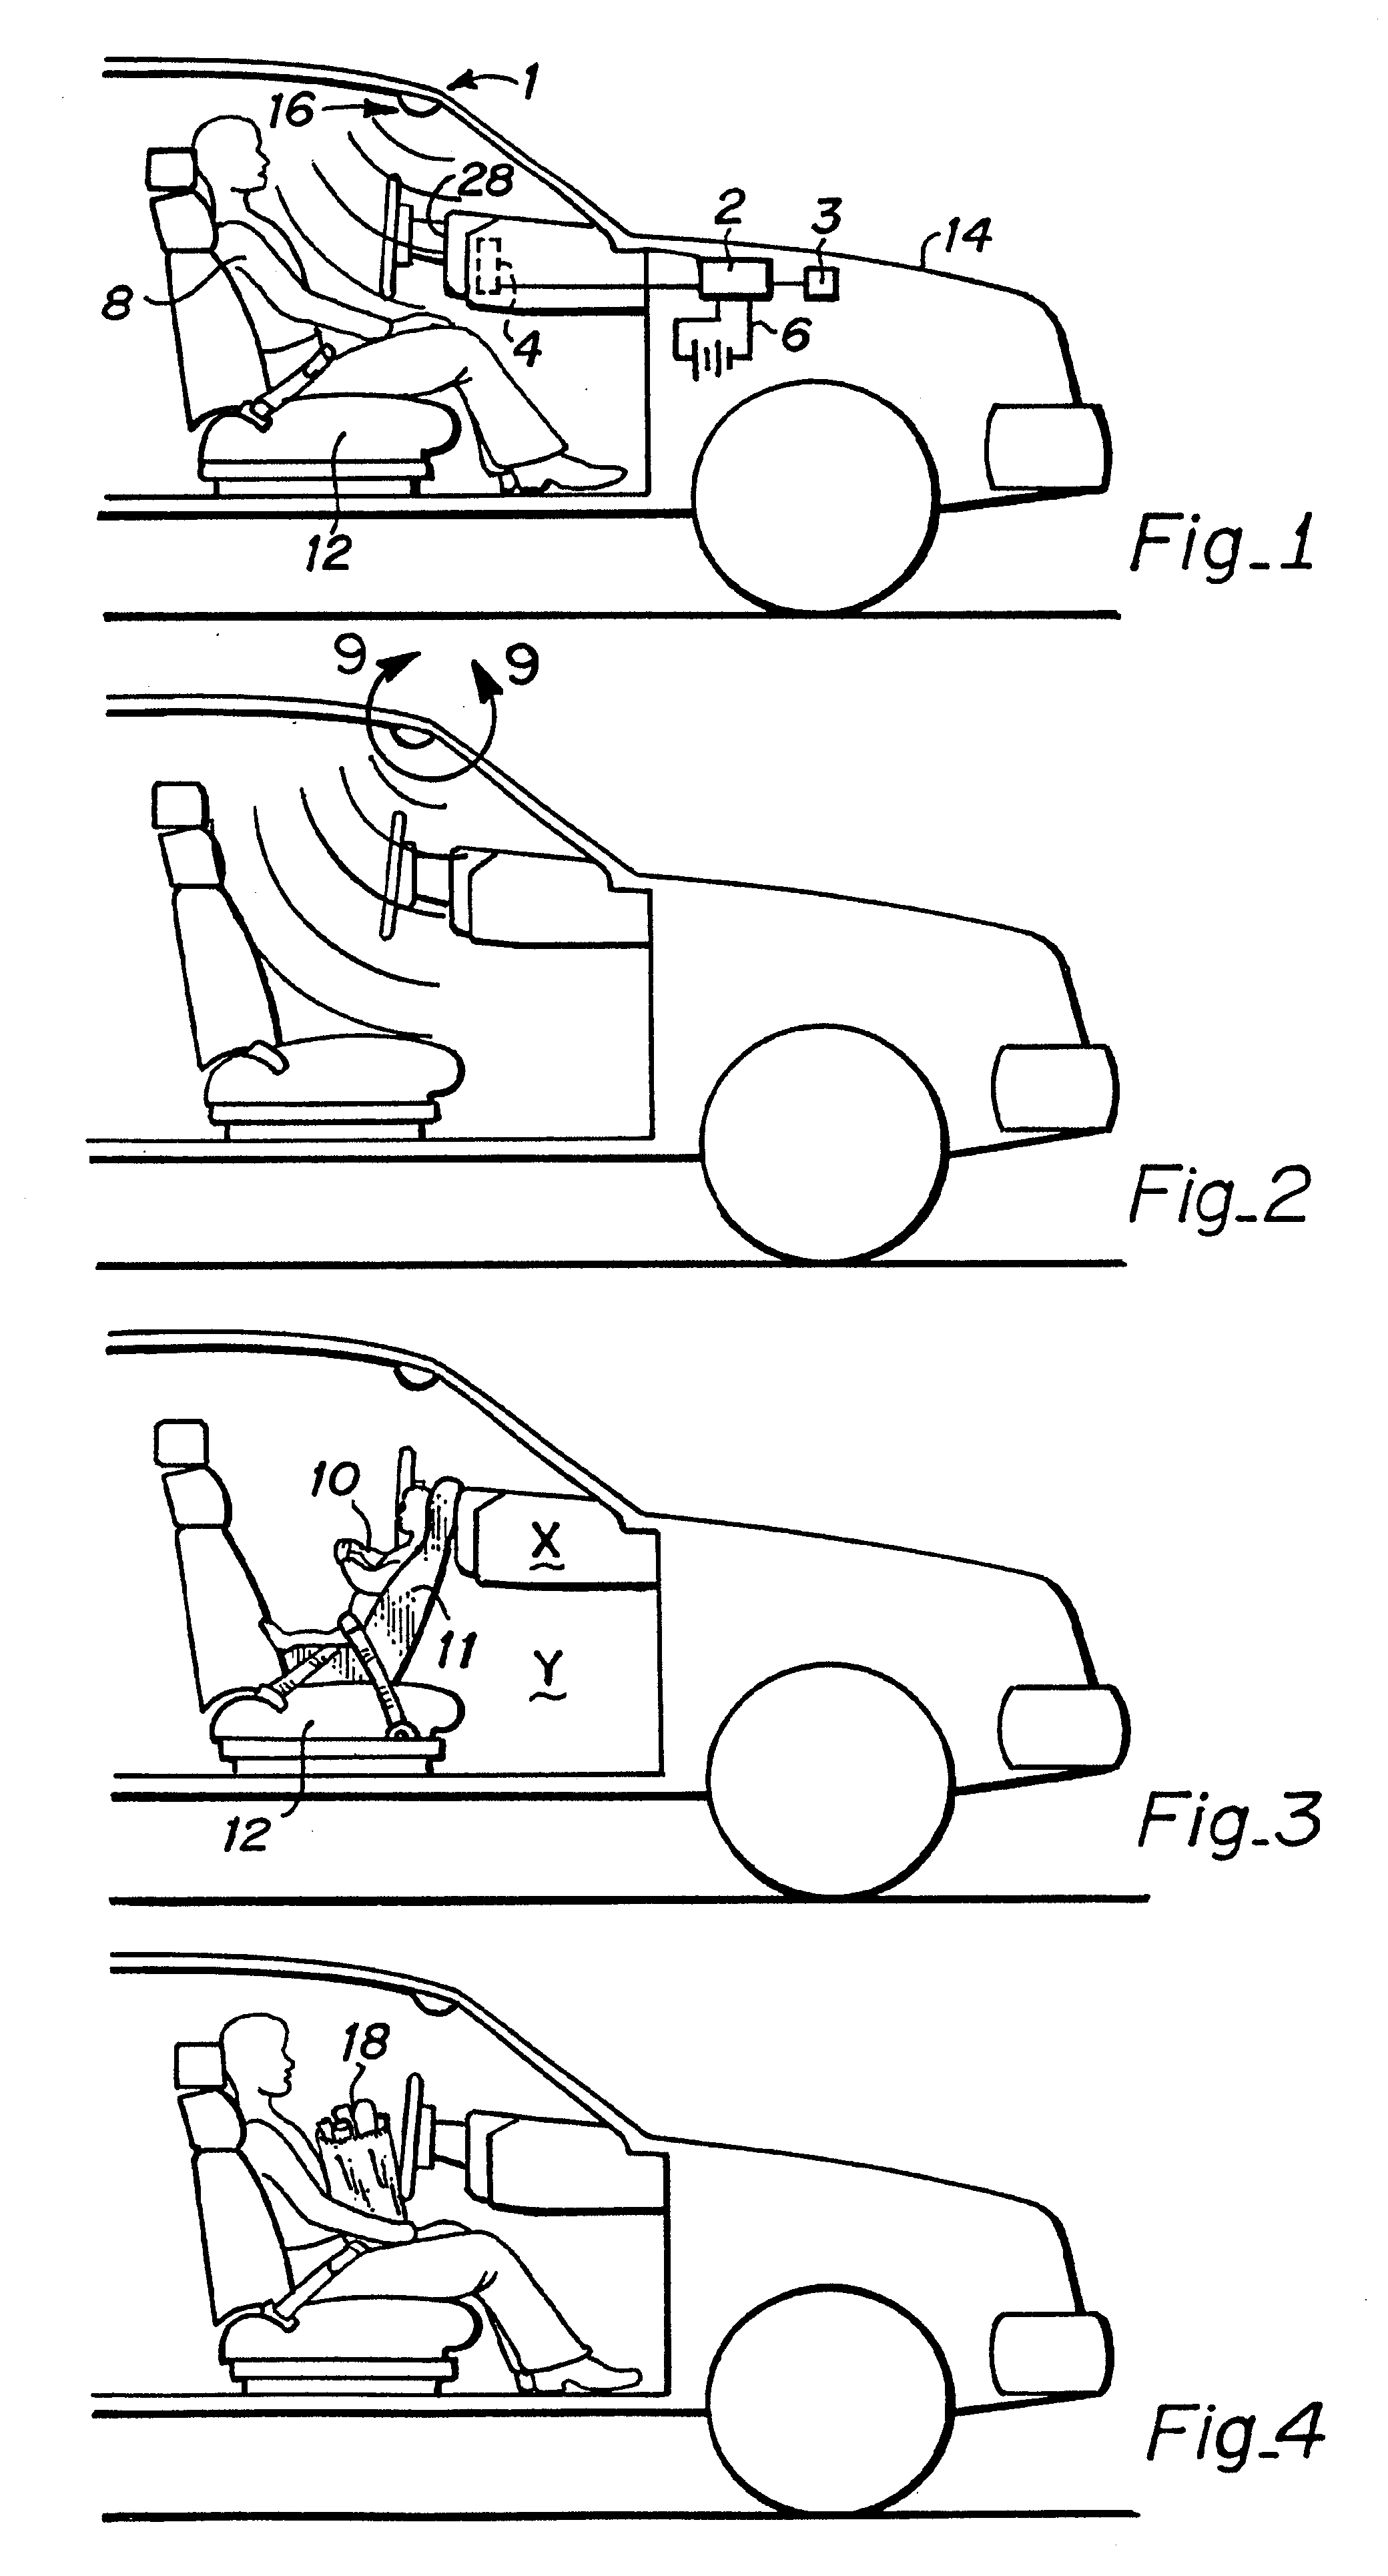 Method of operating a vehicle occupancy state sensor system